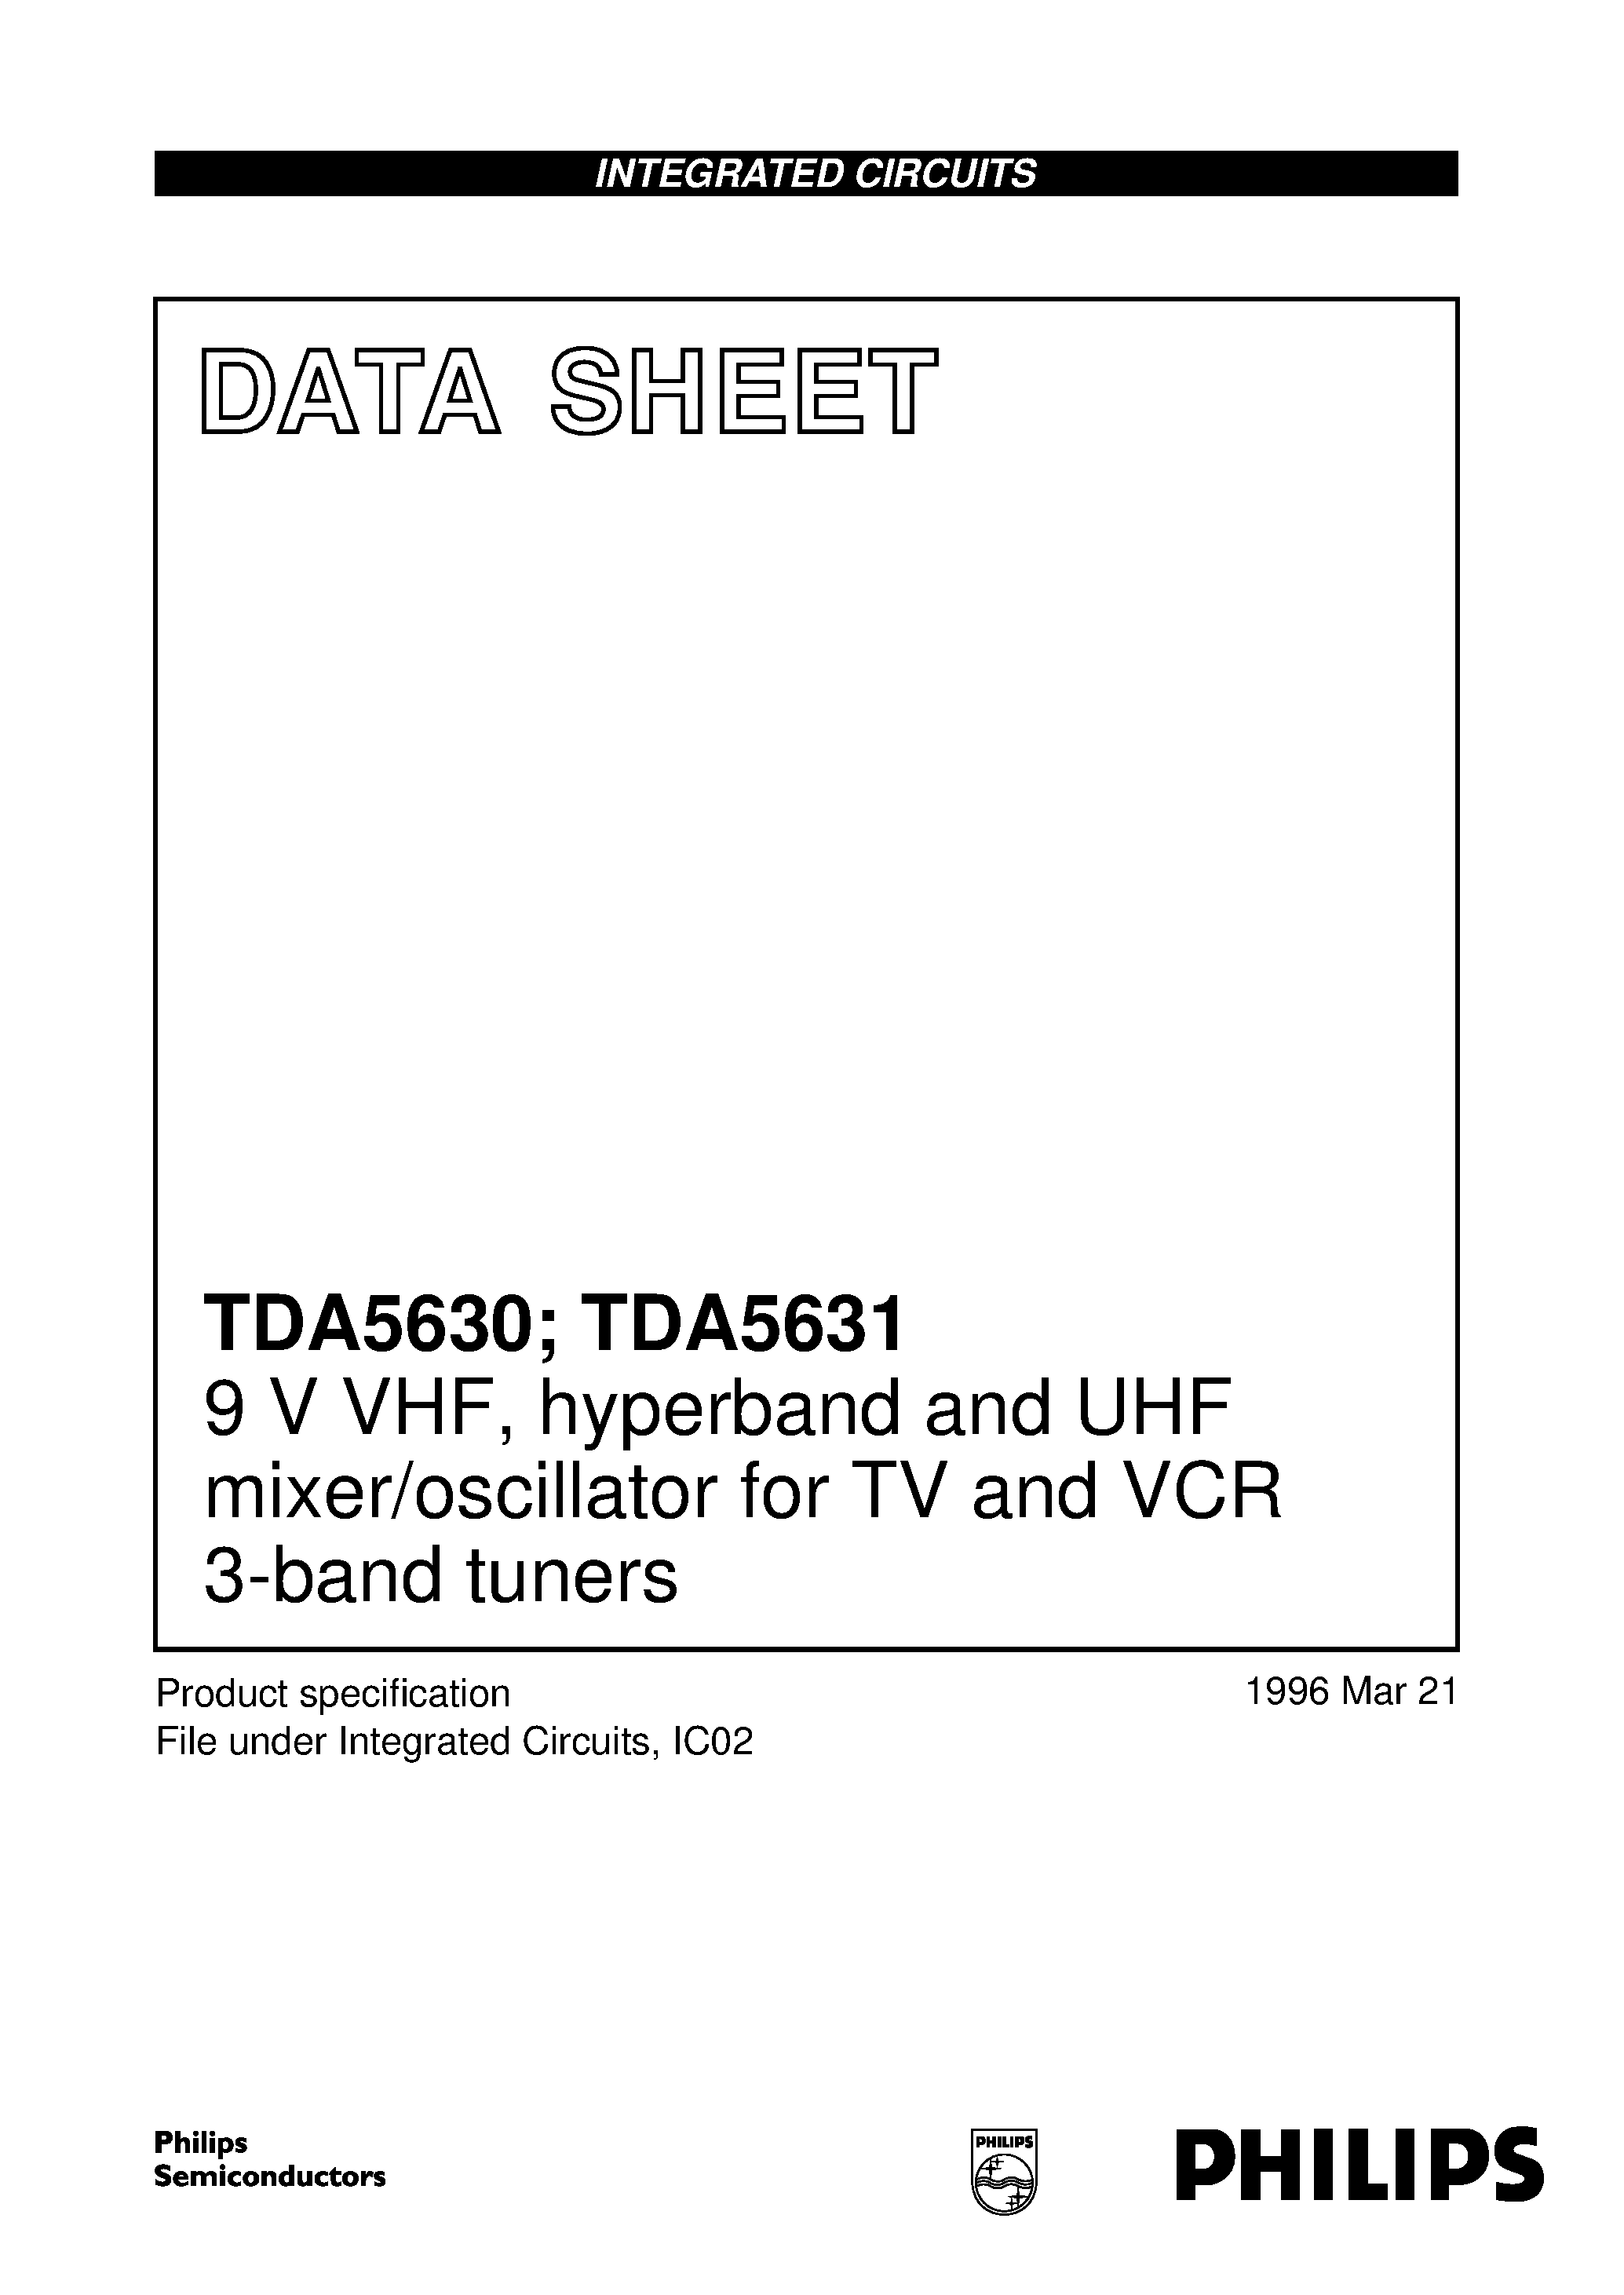 Datasheet TDA5631 - 9 V VHF/ hyperband and UHF mixer/oscillator for TV and VCR 3-band tuners page 1